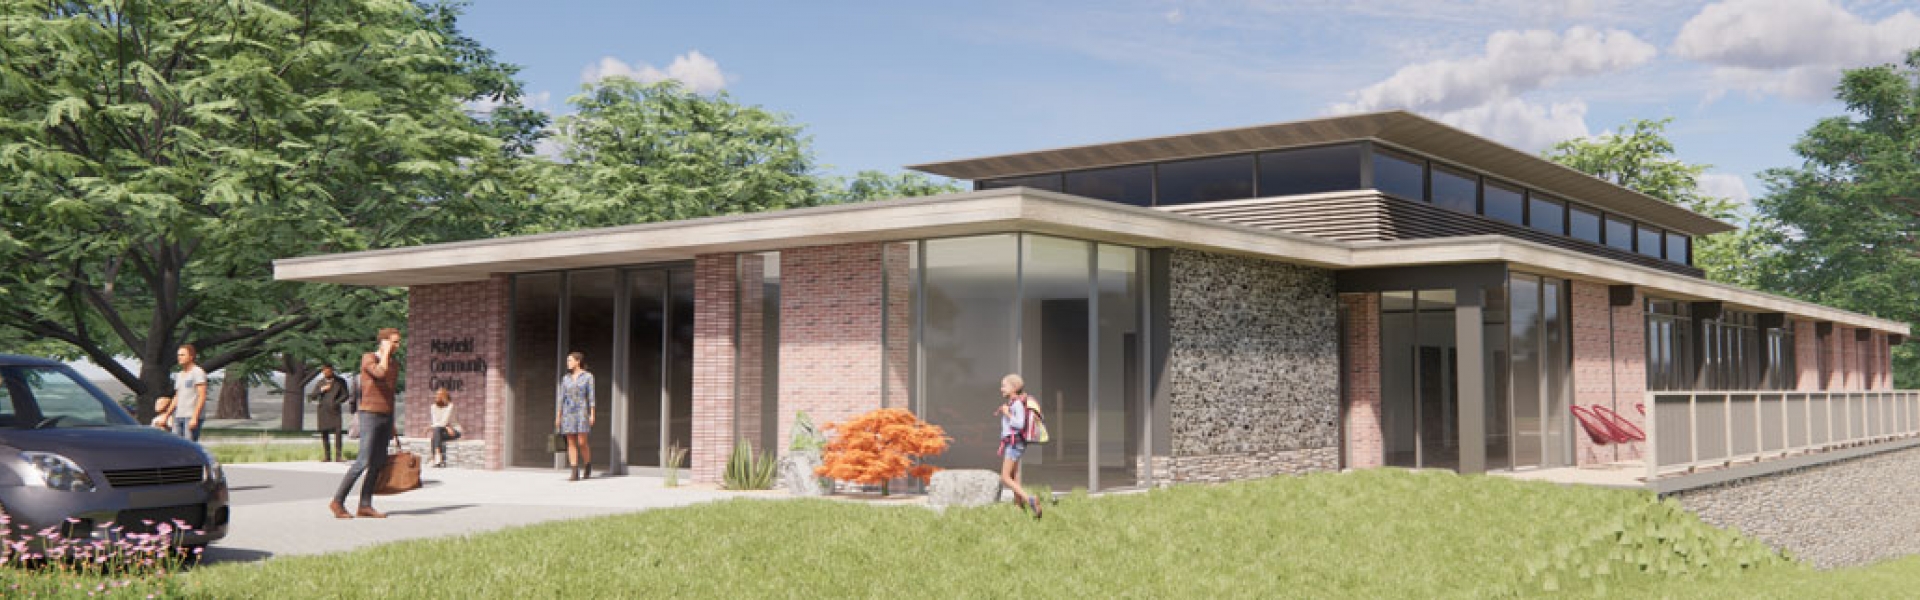 New community and health centre design revealed to residents of Mayfield and Five Ashes